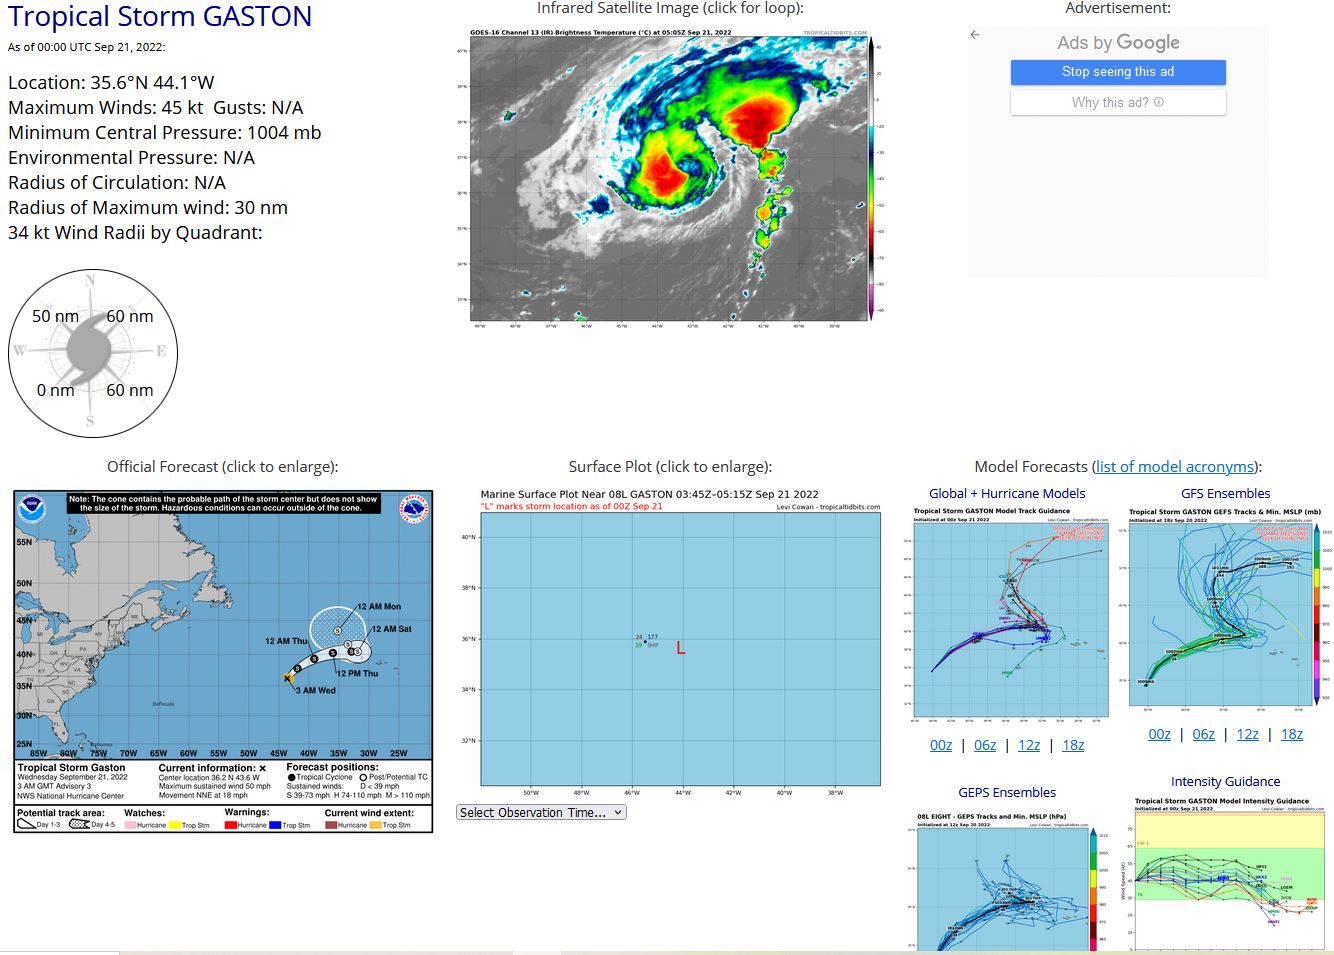 503  WTNT43 KNHC 210257 TCDAT3  Tropical Storm Gaston Discussion Number   3 NWS National Hurricane Center Miami FL       AL082022 300 AM GMT Wed Sep 21 2022  The satellite presentation of Gaston has improved slightly since  the previous advisory, with deep convection persisting over the  low-level circulation center. The latest current intensity  estimates reflect what has been seen in the satellite imagery, with  TAFB and SAB coming in at 45 knots, while the ADT and AiDT values  from UW-CIMSS showing 35 knots and 46 knots respectively. Based on  a blend of these data along with the improved satellite appearance,  the initial intensity has been raised to 45 knots.  Gaston continues on a path toward the north-northeast,  with the initial motion estimated to be 020/16 kt.  A turn to  northeast is expected today, followed by a turn to the east by  Thursday as the tropical storm moves along the the northern  periphery of a subtropical ridge. By late this week, Gaston is  expected to stall to the west of the Azores in weak steering  currents as a mid-level ridge builds to the north of cyclone. A turn  to the northwest or north is expected over the weekend as Gaston  moves in the steering flow between Hurricane Fiona to the west and  the building mid-level ridge to the east. The latest NHC track  forecast has changed little and lies very close to the previous  advisory track, and closely follows the consensus track guidance.  The period for additional intensification is quickly closing, as  Gaston is moving over the 26C isotherm, and will move over  progressively cooler water through the remainder of the forecast  period. Additionally, the impact of the vertical wind shear will  increase in a couple days as the tropical cyclone stalls out while  westerly shear holds in the 25 to 30 knot range. As a result, the  intensity forecast calls for slight strengthening today, followed by  little change in strength for another day or so after that. The  combination of cool SSTs, dry mid-level air, and increasing vertical  wind shear should then lead to slow weakening through the remainder  of the week. The latest NHC was adjusted upward through the first 24  hours to account for the strengthening which has already occurred,  with only minor adjustments made through the remainder of the  forecast period, closely following the consensus intensity aids.    Interests in the Azores should continue to monitor the forecast for  Gaston.   FORECAST POSITIONS AND MAX WINDS  INIT  21/0300Z 36.2N  43.6W   45 KT  50 MPH  12H  21/1200Z 37.8N  41.9W   50 KT  60 MPH  24H  22/0000Z 39.3N  39.1W   50 KT  60 MPH  36H  22/1200Z 40.2N  36.0W   50 KT  60 MPH  48H  23/0000Z 40.4N  32.9W   45 KT  50 MPH  60H  23/1200Z 40.4N  31.9W   45 KT  50 MPH  72H  24/0000Z 40.4N  31.9W   45 KT  50 MPH...POST-TROP/EXTRATROP  96H  25/0000Z 41.5N  33.5W   45 KT  50 MPH...POST-TROP/EXTRATROP 120H  26/0000Z 43.5N  35.2W   40 KT  45 MPH...POST-TROP/EXTRATROP  $$ Forecaster D. Zelinsky/Jelsema